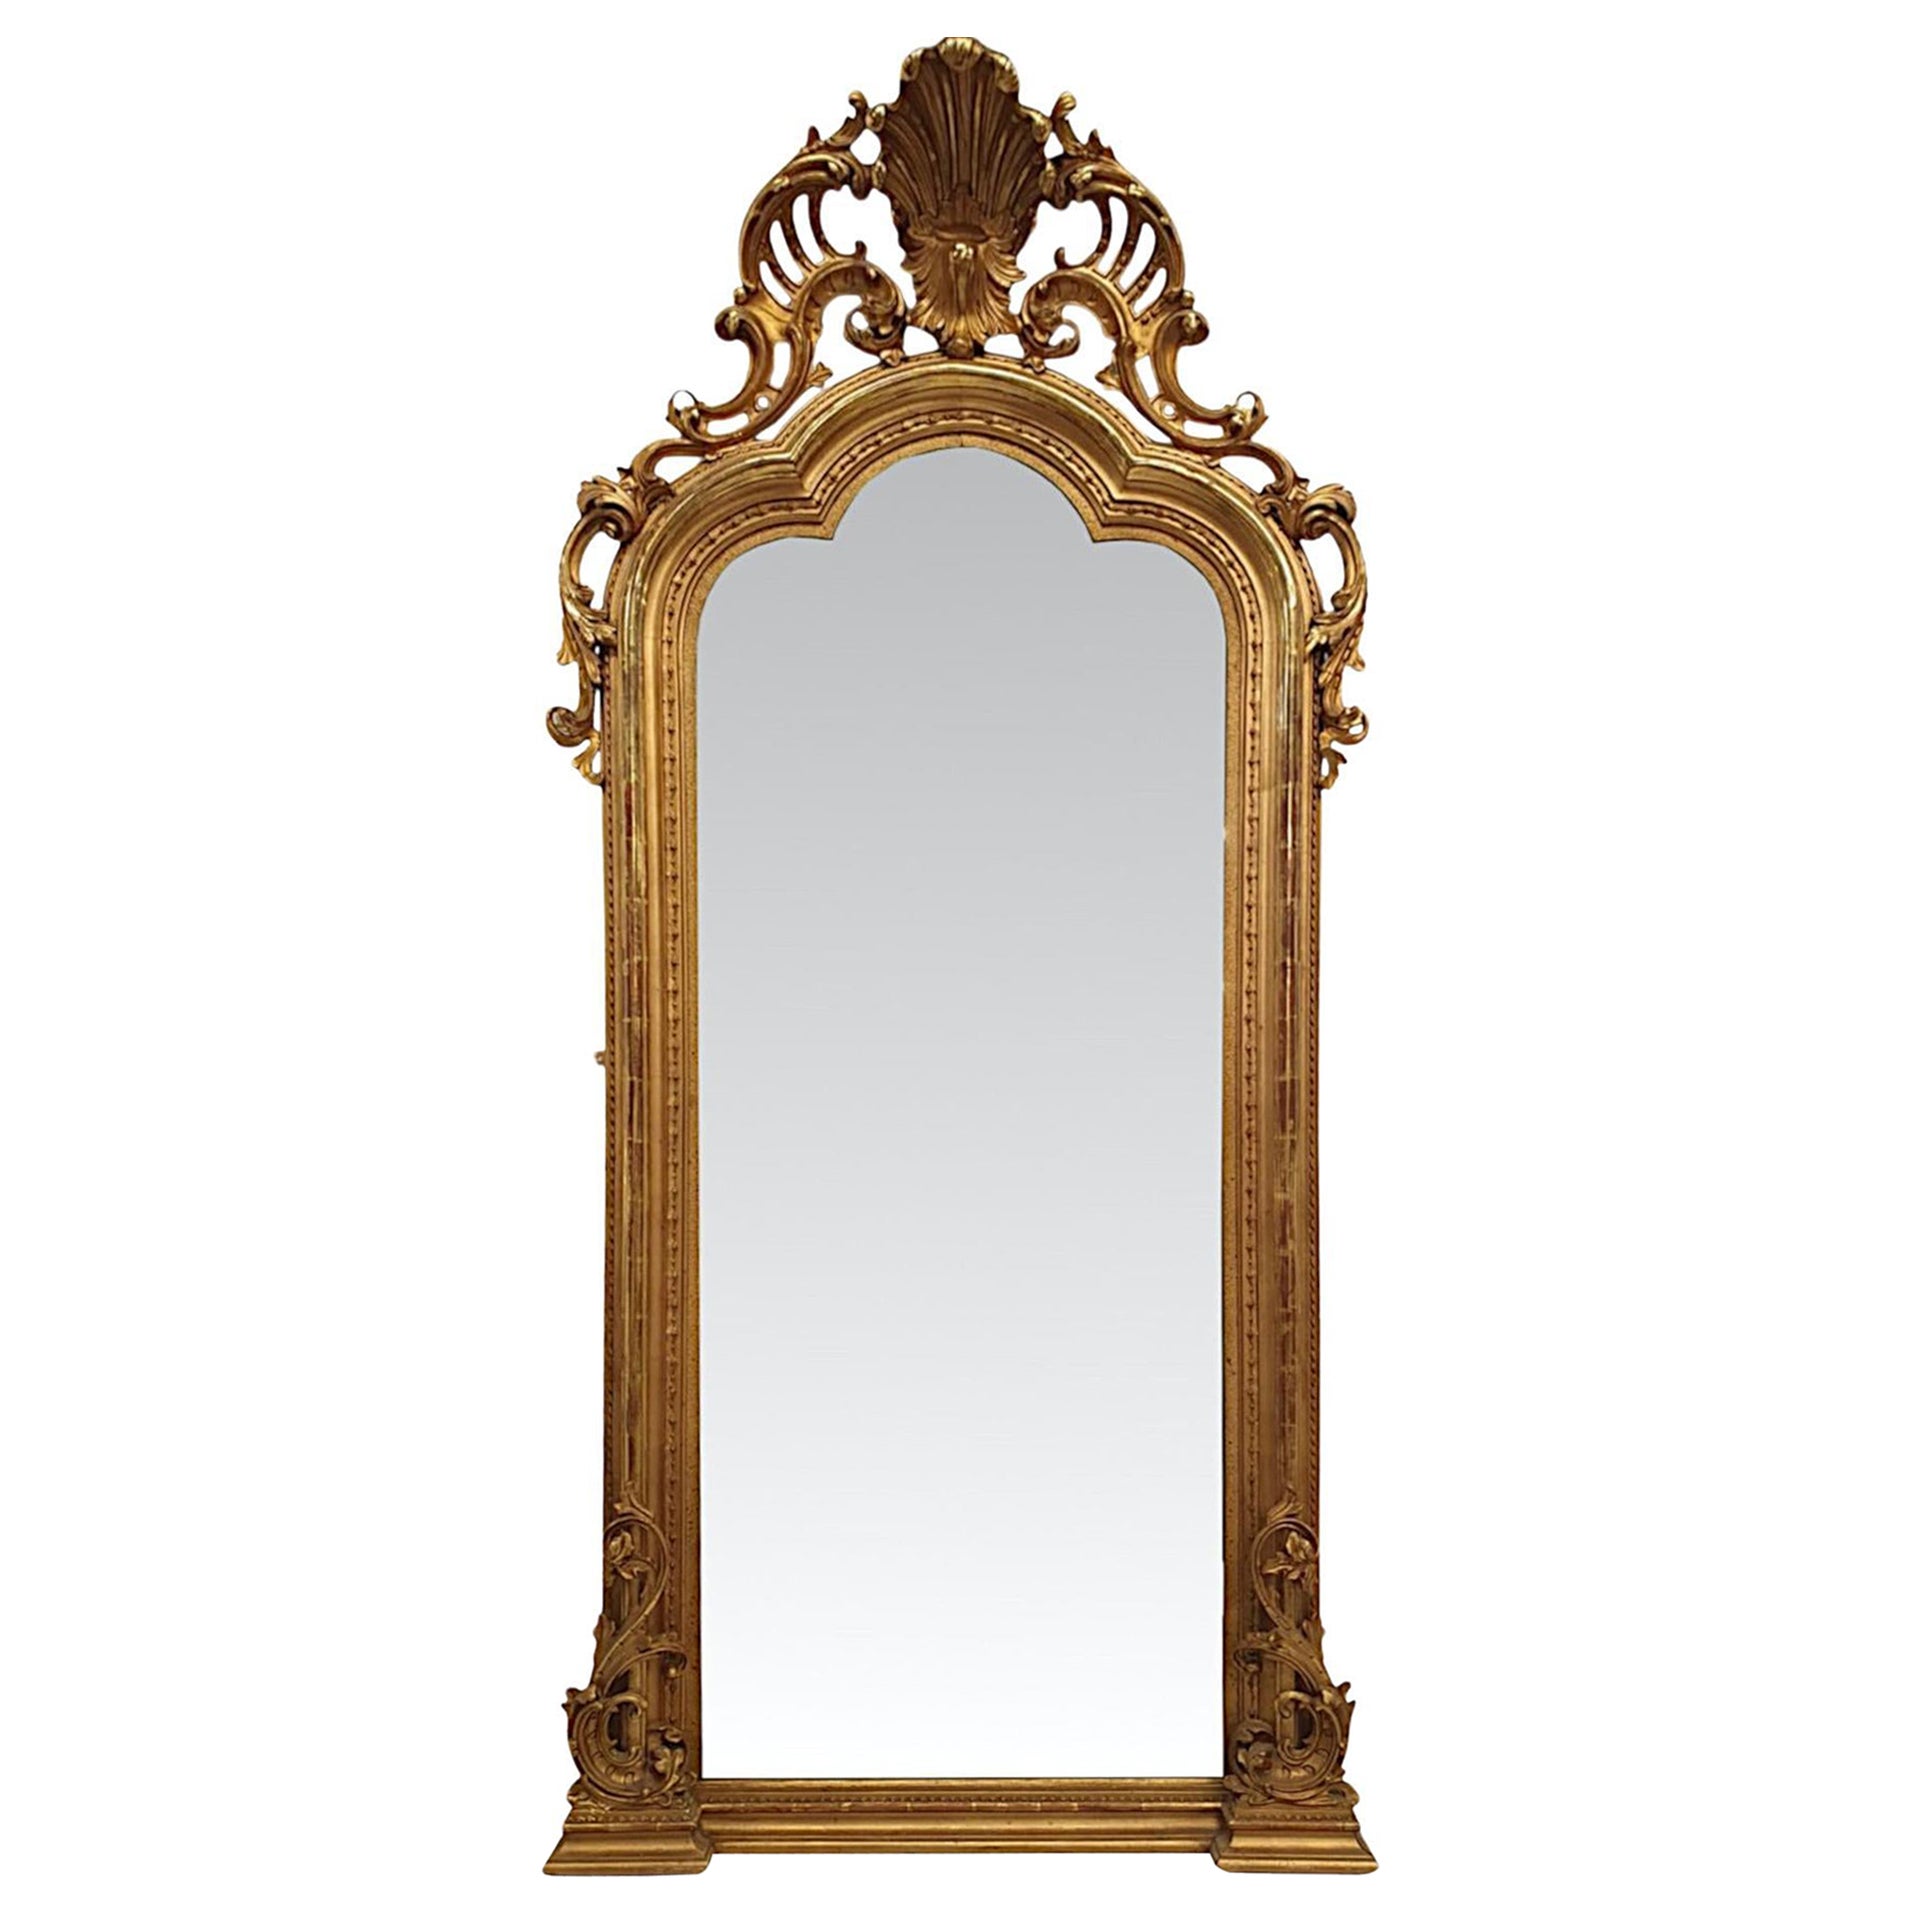  A Fabulous Large 19th Century Giltwood Hall or Pier or Dressing Mirror